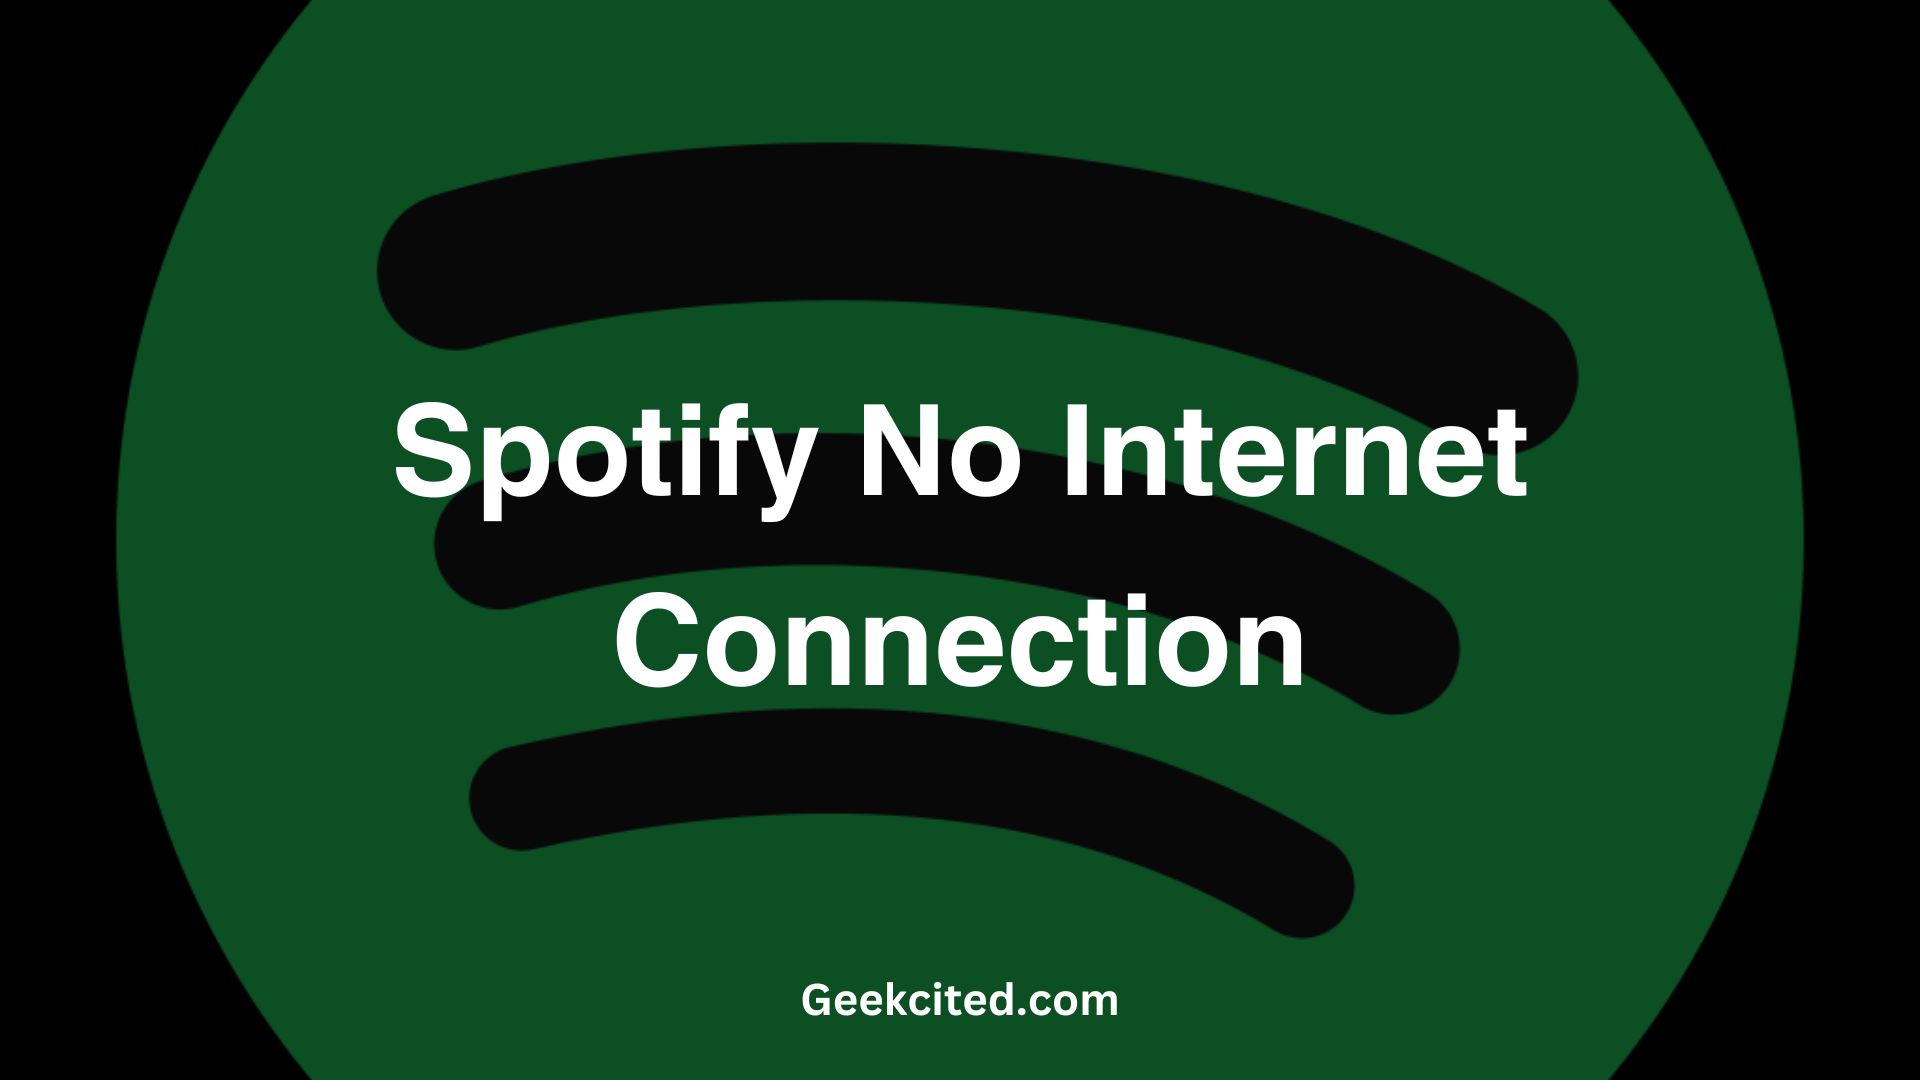 Spotify No Internet Connection